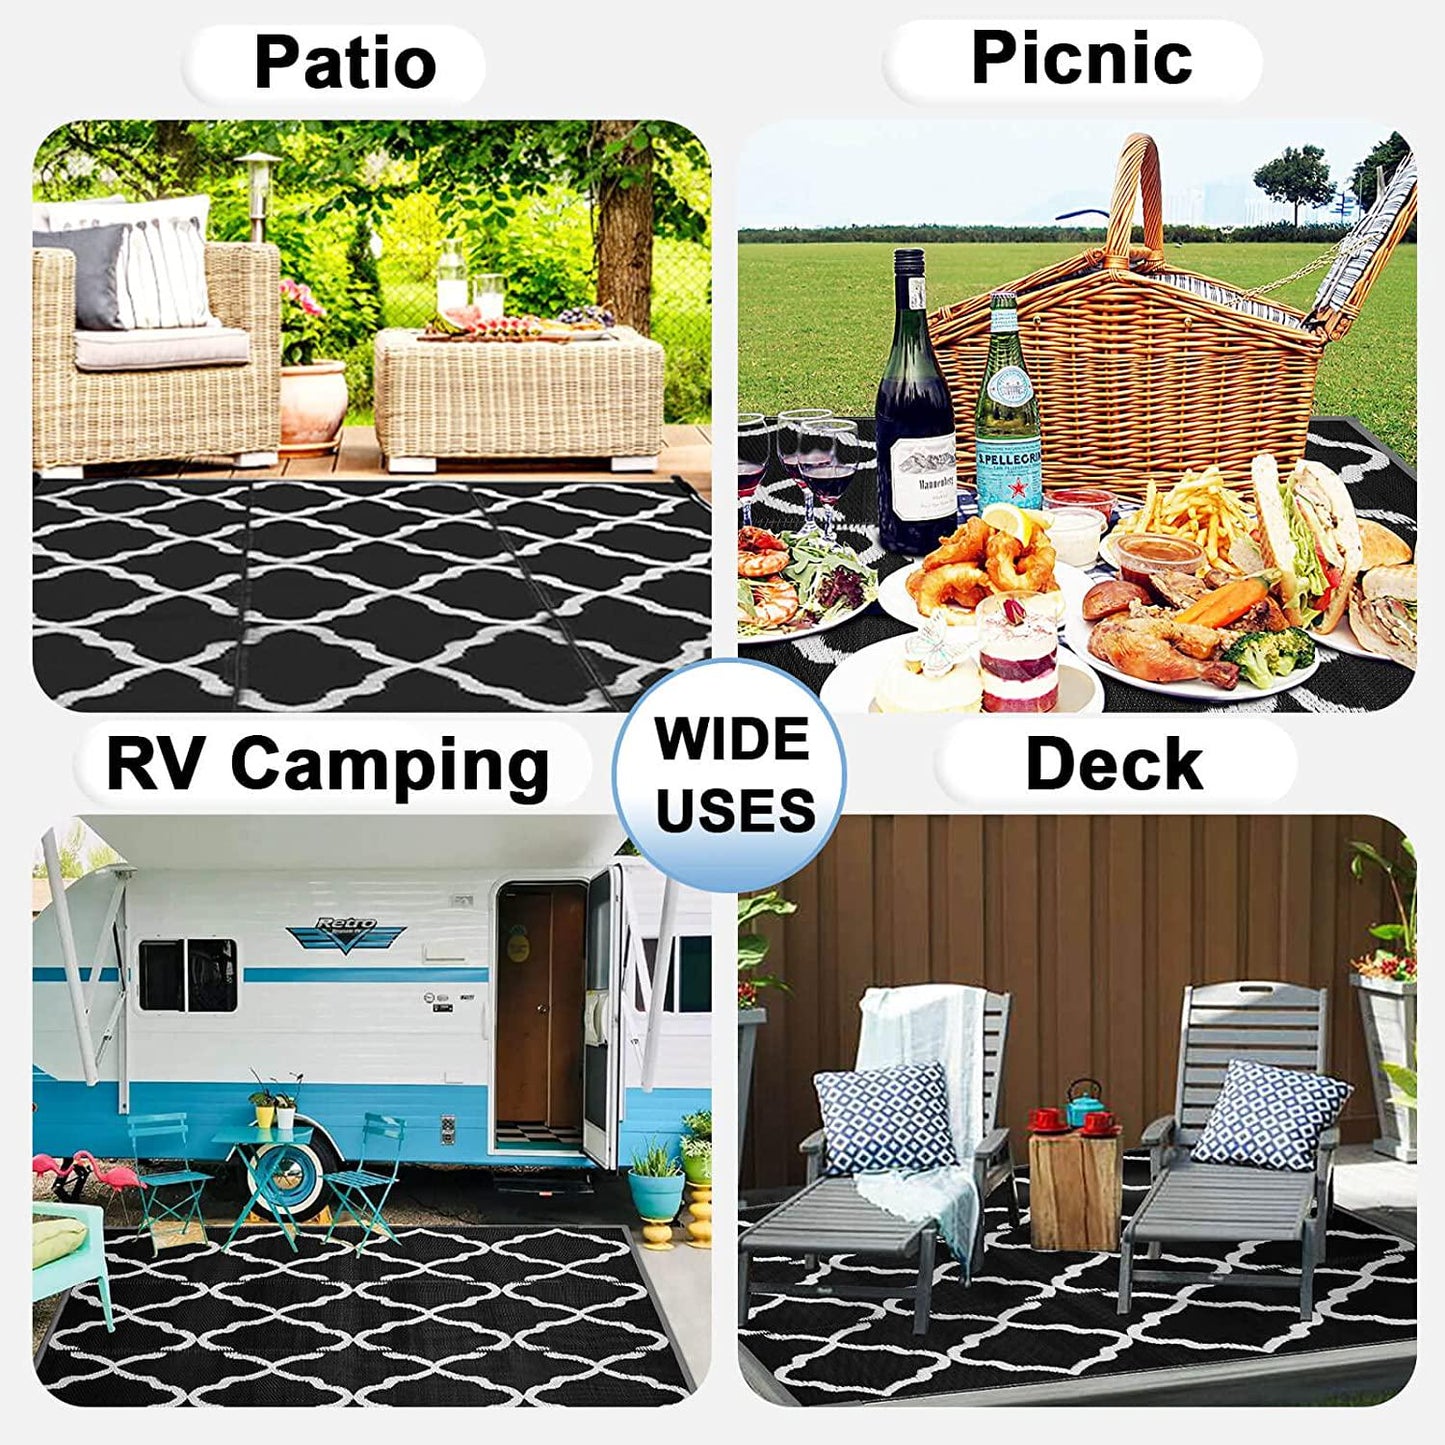 OutdoorLines Outdoor Area Rugs for Patio 4x6 ft - Reversible Outside Carpet, Stain and UV Resistant RV Mats, Plastic Straw Rug for , Deck , Porch and Moroccan Black and Light Grey